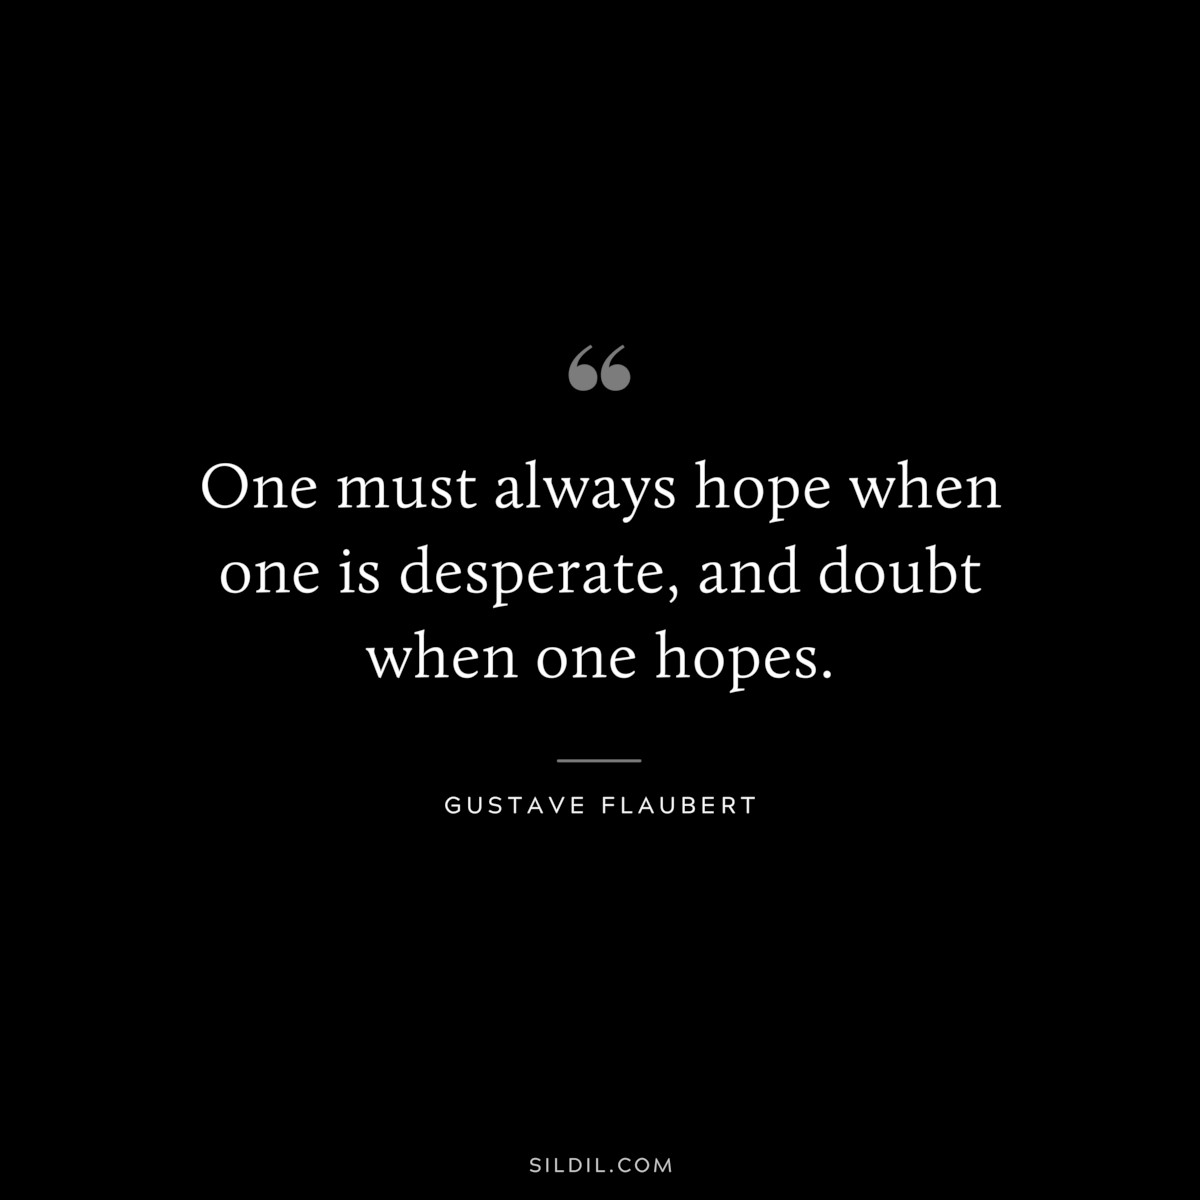 One must always hope when one is desperate, and doubt when one hopes. ― Gustave Flaubert